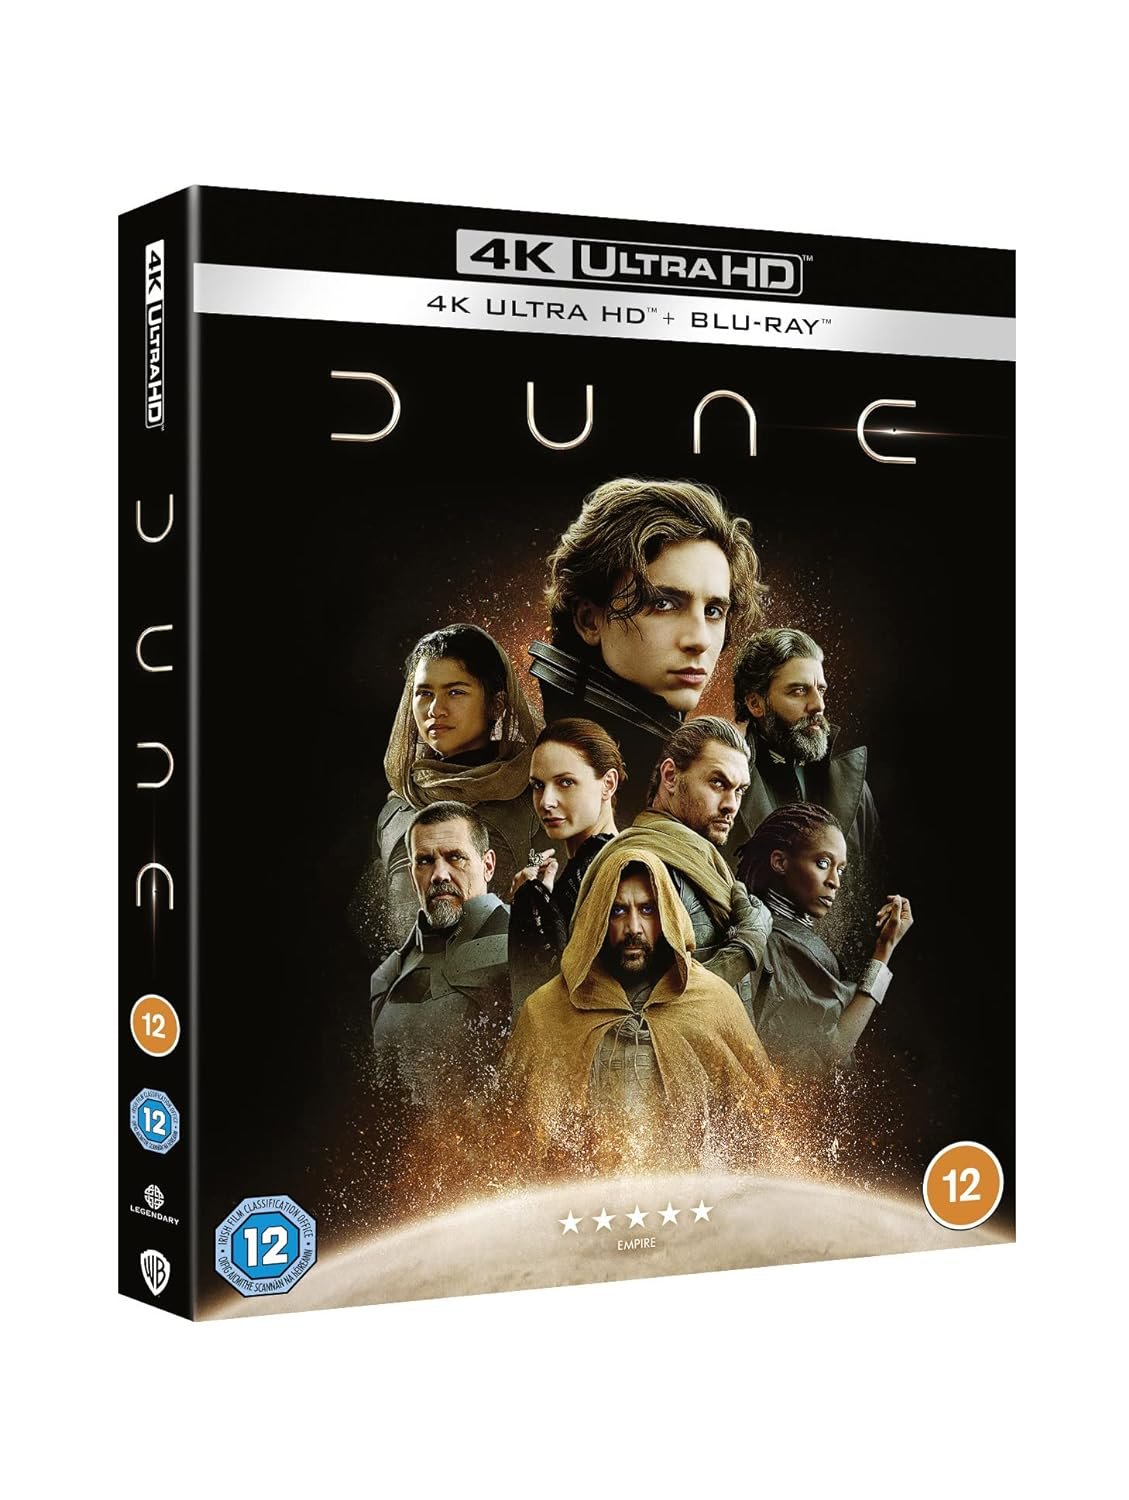 A Dune [4K Ultra-HD] [Blu-ray] [2021] [Region Free] [4K UHD] box set of the movie "Dune," featuring a collage of main characters including Paul Atreides with a desert and cosmic backdrop, encased in a Format: Blu-ray.